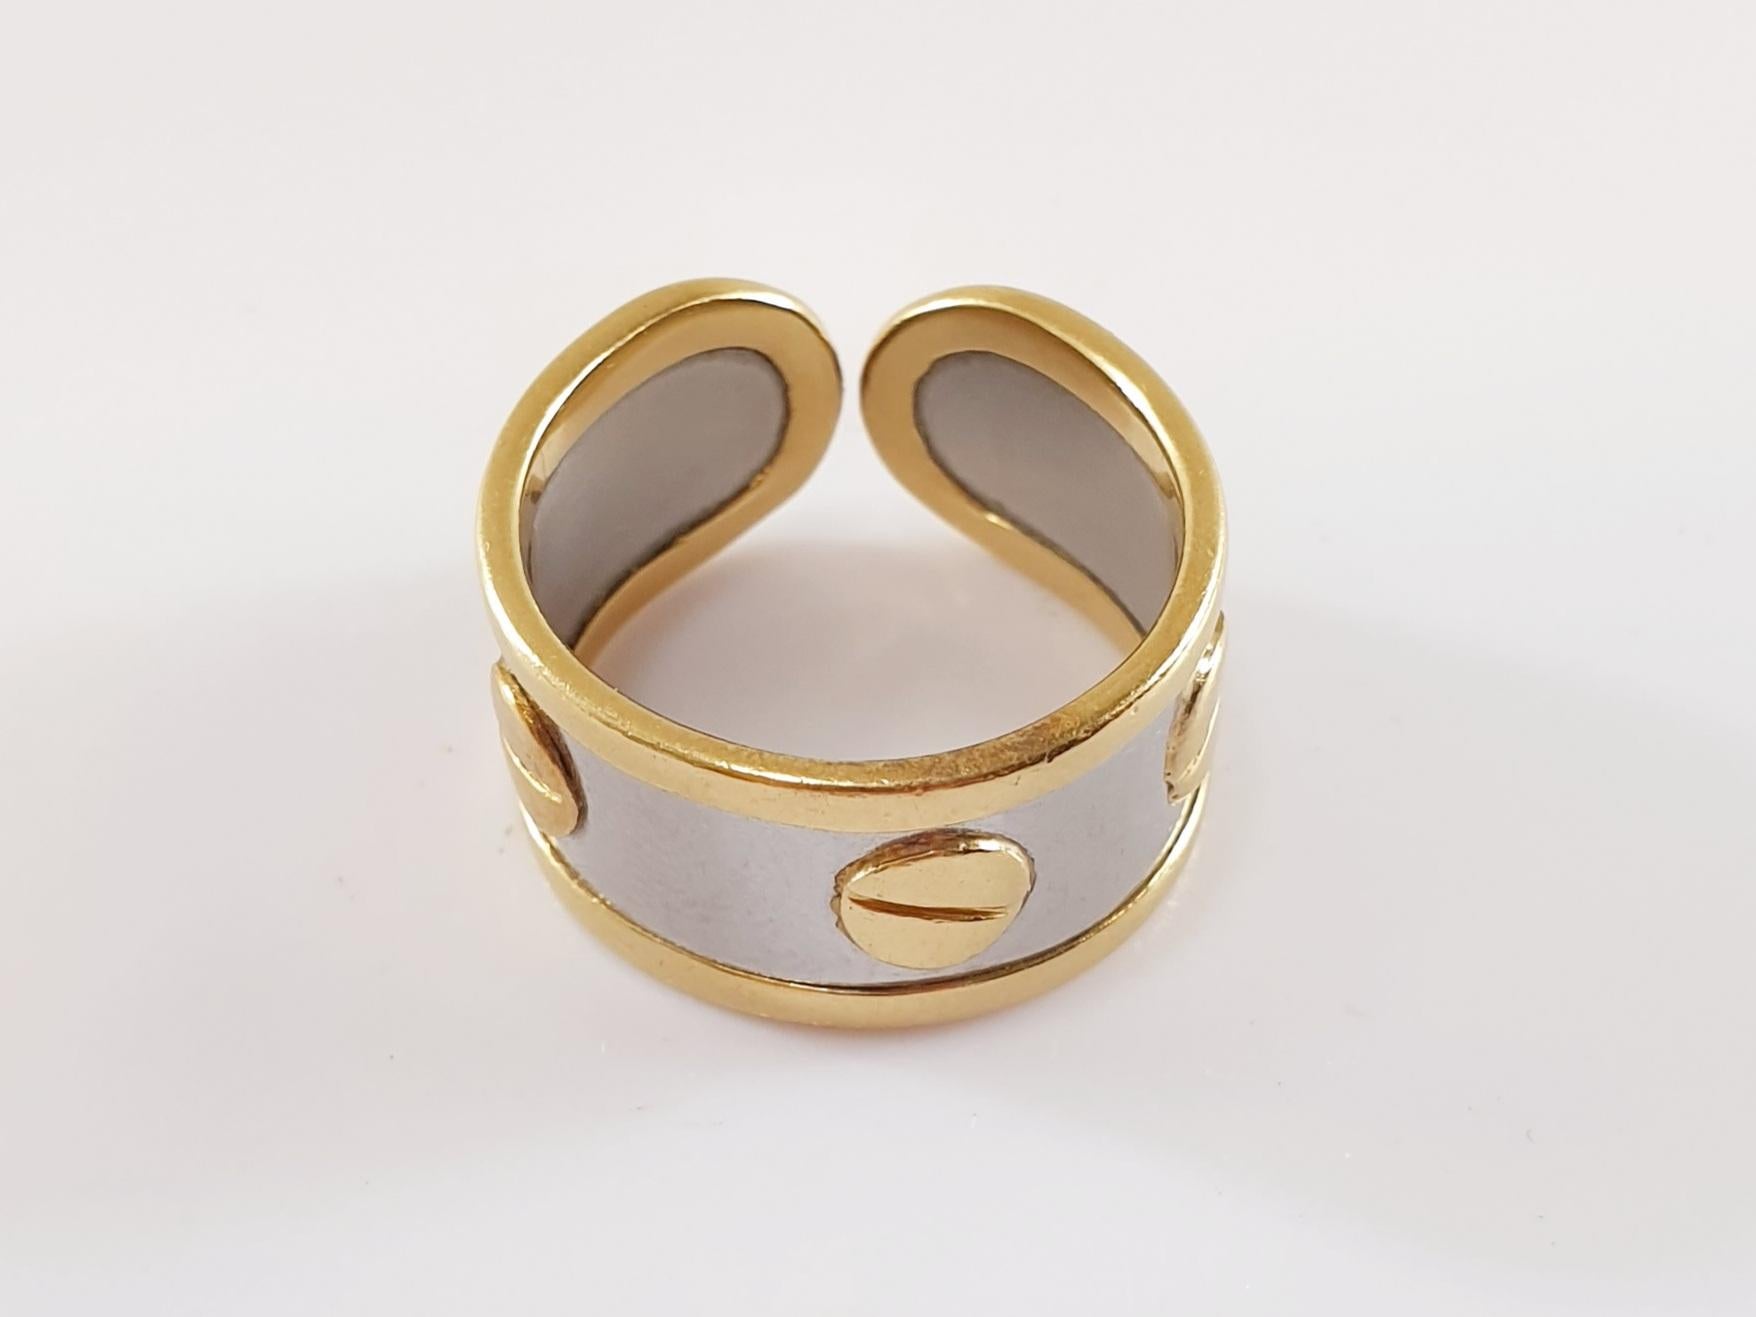 One of the most stylish designs, this classic and estament  Love Ring
Crafted in stainless steel and  18k Yellow Gold
Weight 5,4 grams.
Size 12

PRADERA is a second generation of a family run business were they have being official distributers of